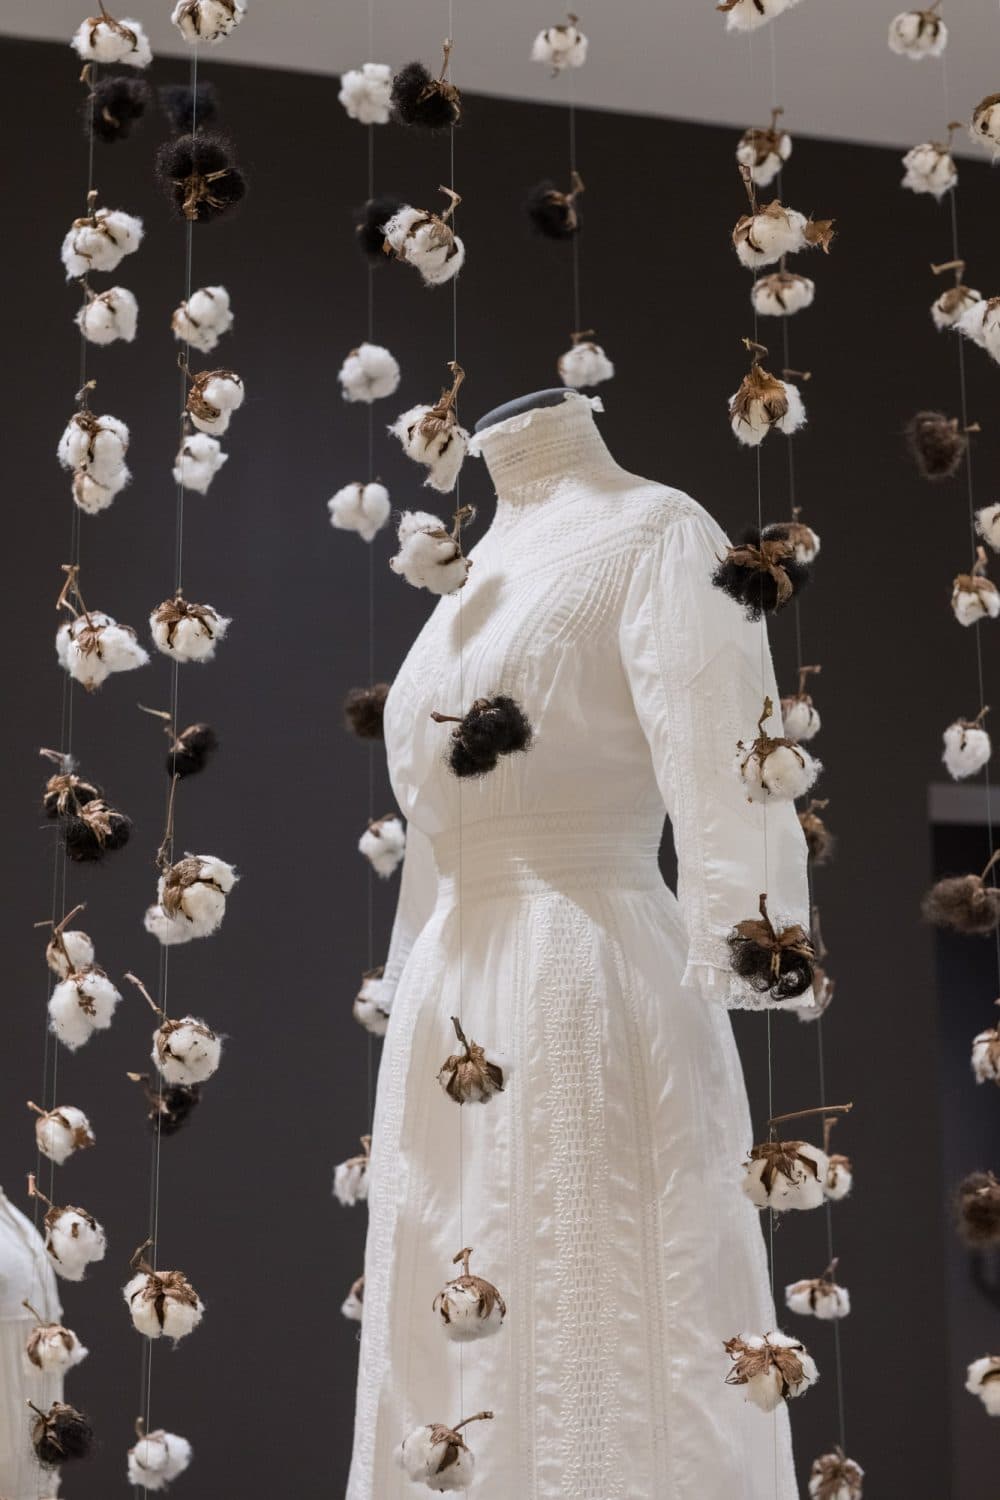 Karin Jones’ Freed installation featuring strings of raw cotton bulbs and Black hair suspended around a wedding dress from 1893 from the Collection of Canadian Dress.